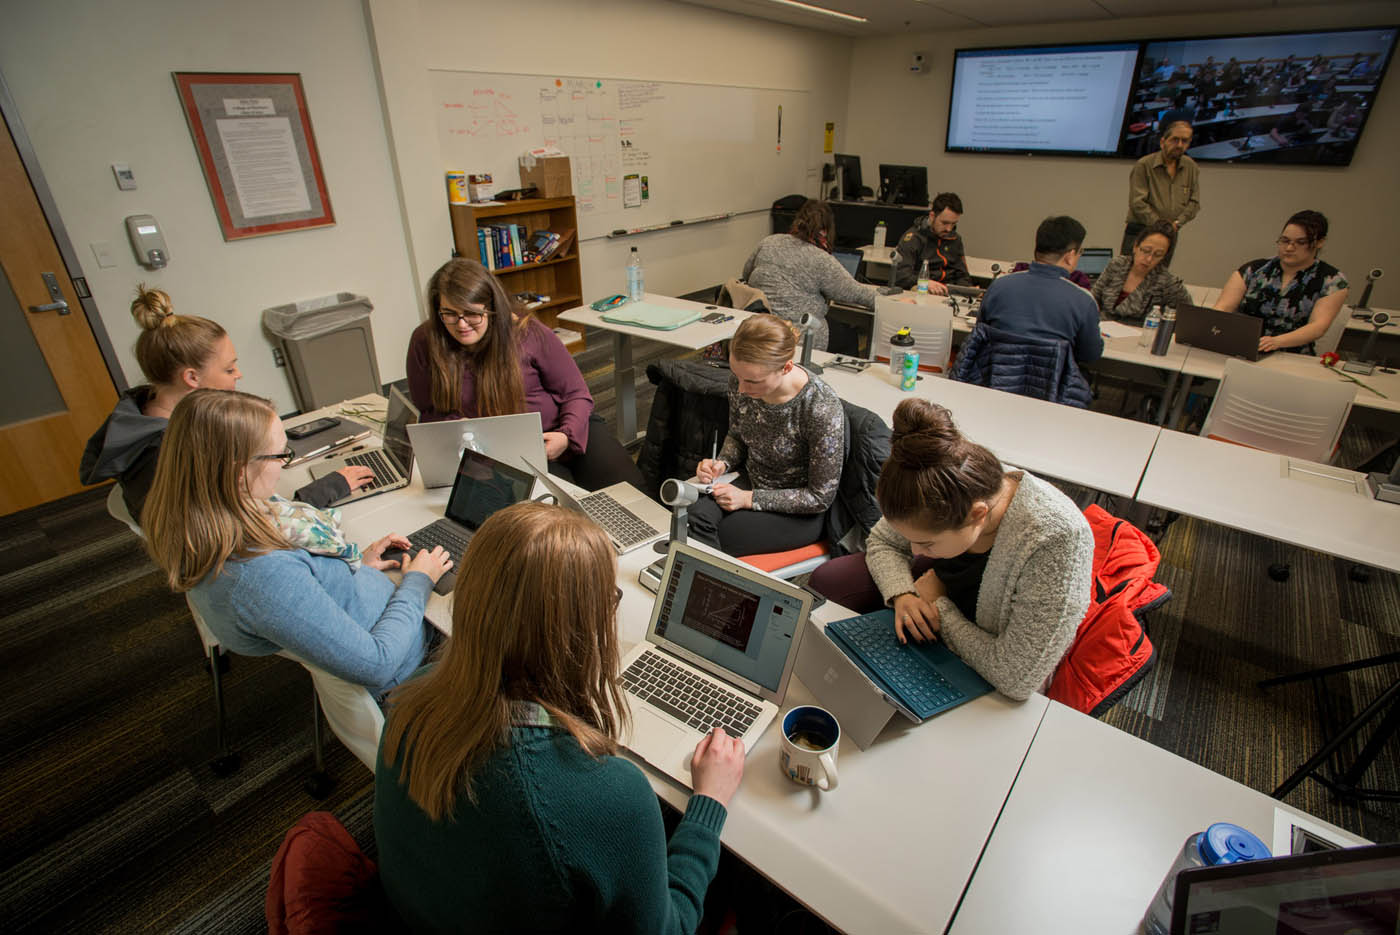 Students study and work together in a lecture